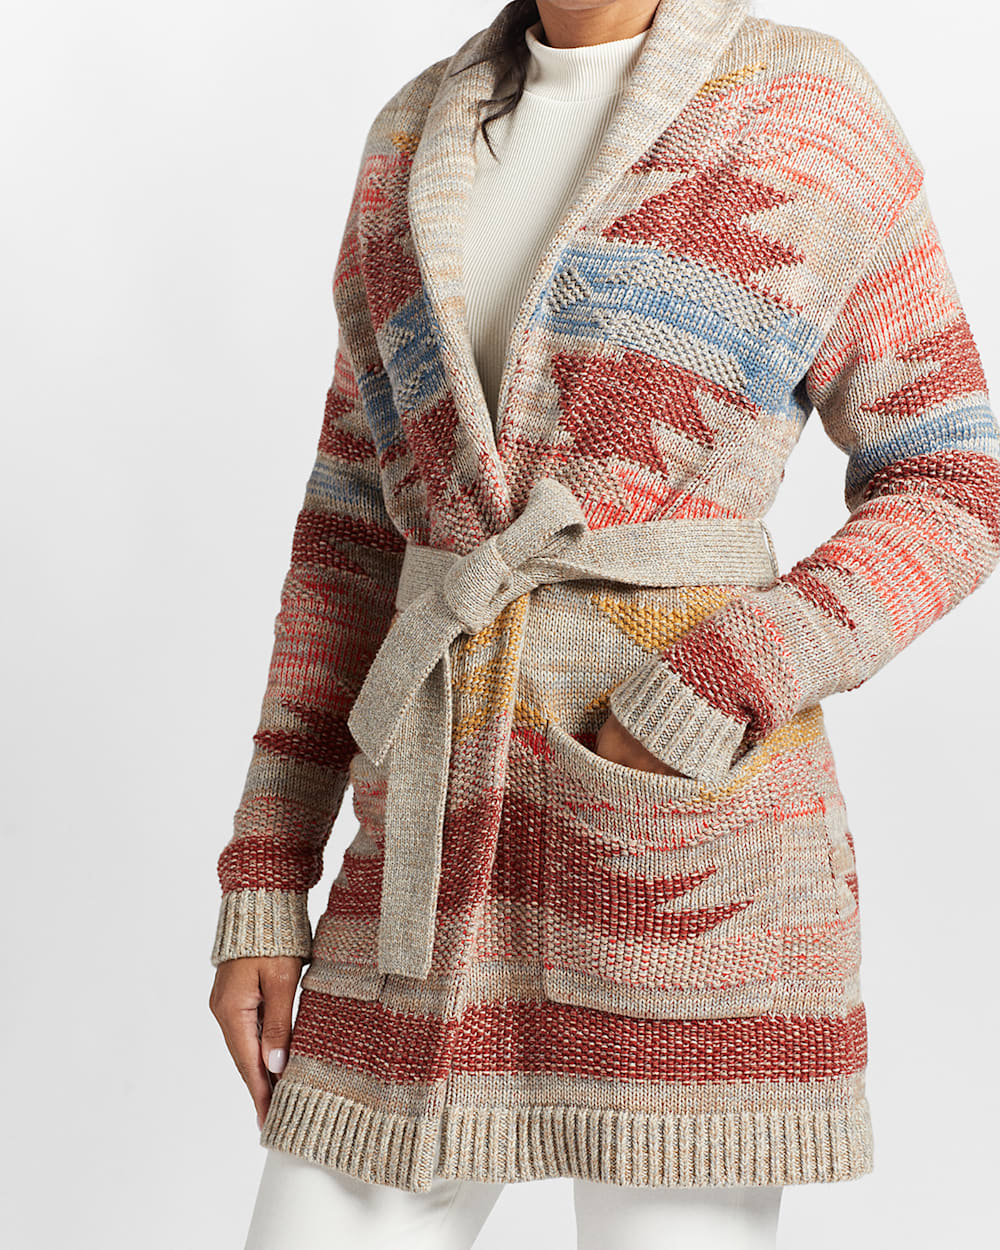 ALTERNATE VIEW OF WOMEN'S MONTEREY BELTED COTTON CARDIGAN IN TAUPE MULTI image number 4